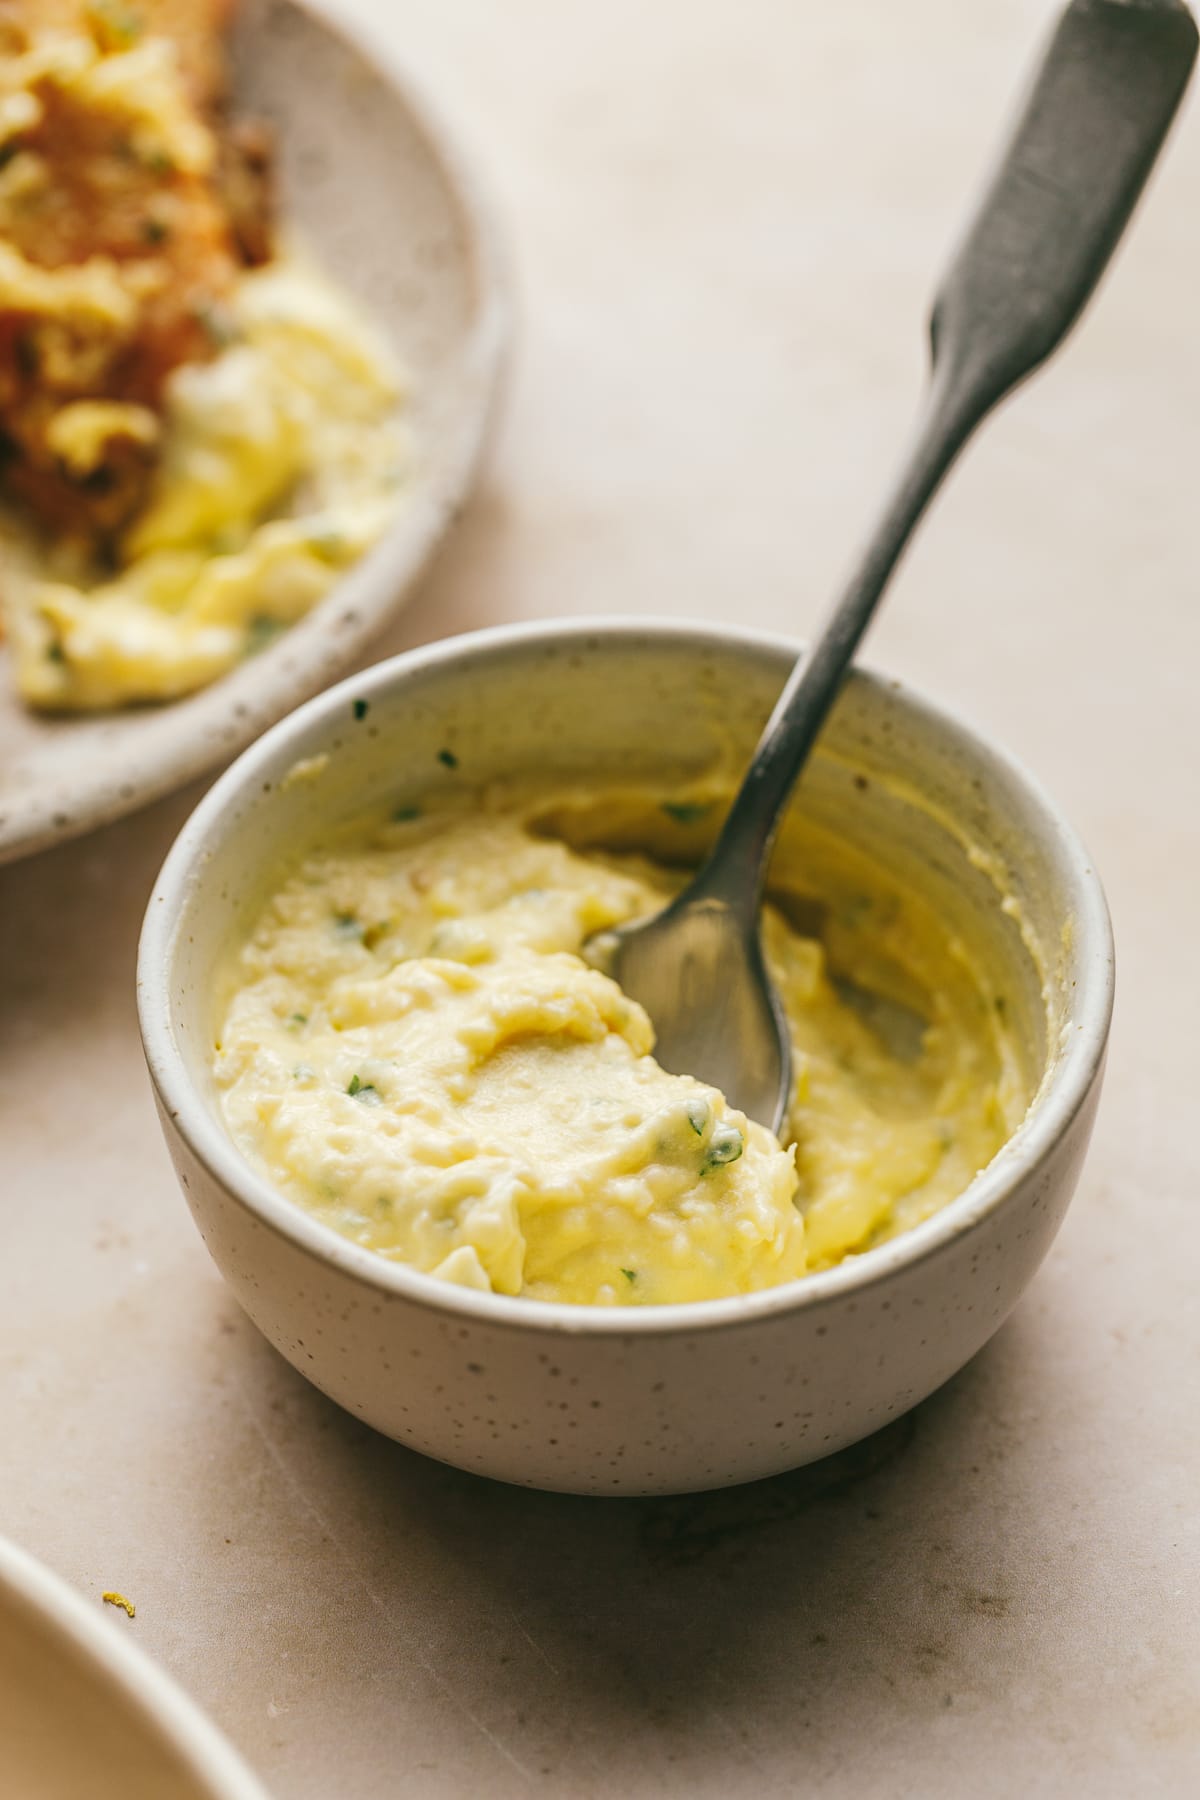 Garlic parmesan dip sauce in a dish with a spoon.